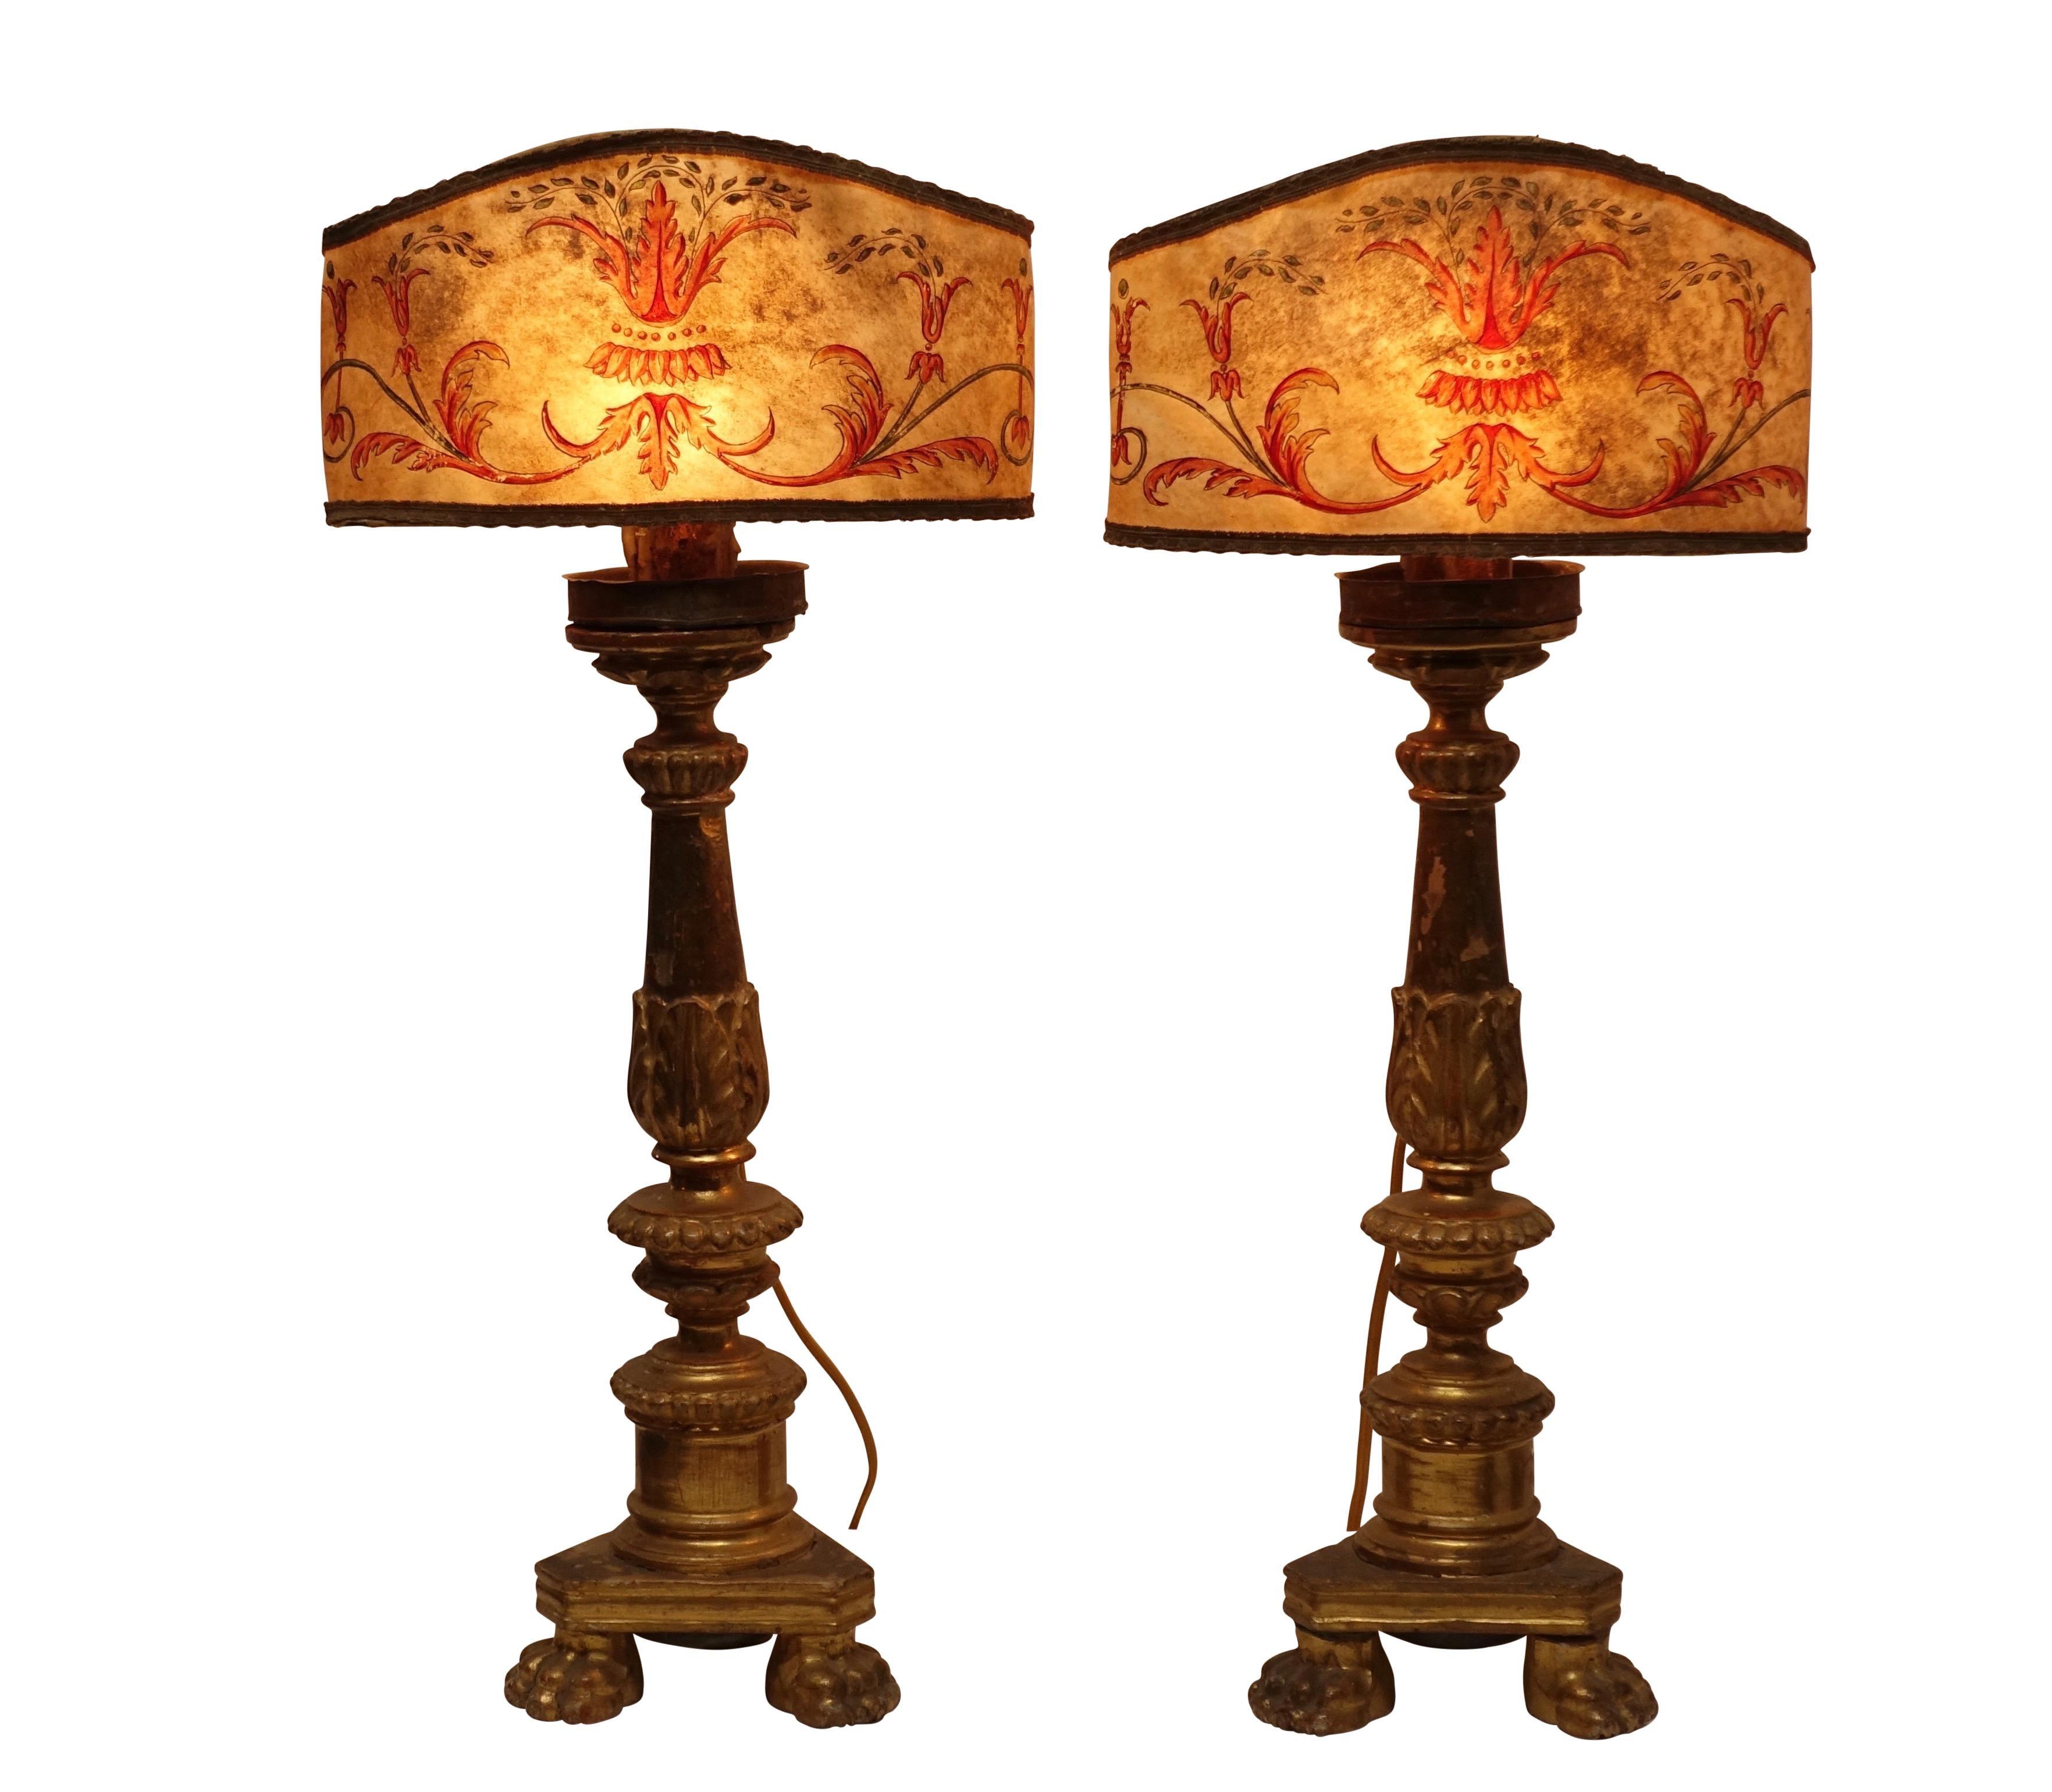 Pair of Gilt Candlestick Lamps with Parchment Shades, Italian, 18th Century 6